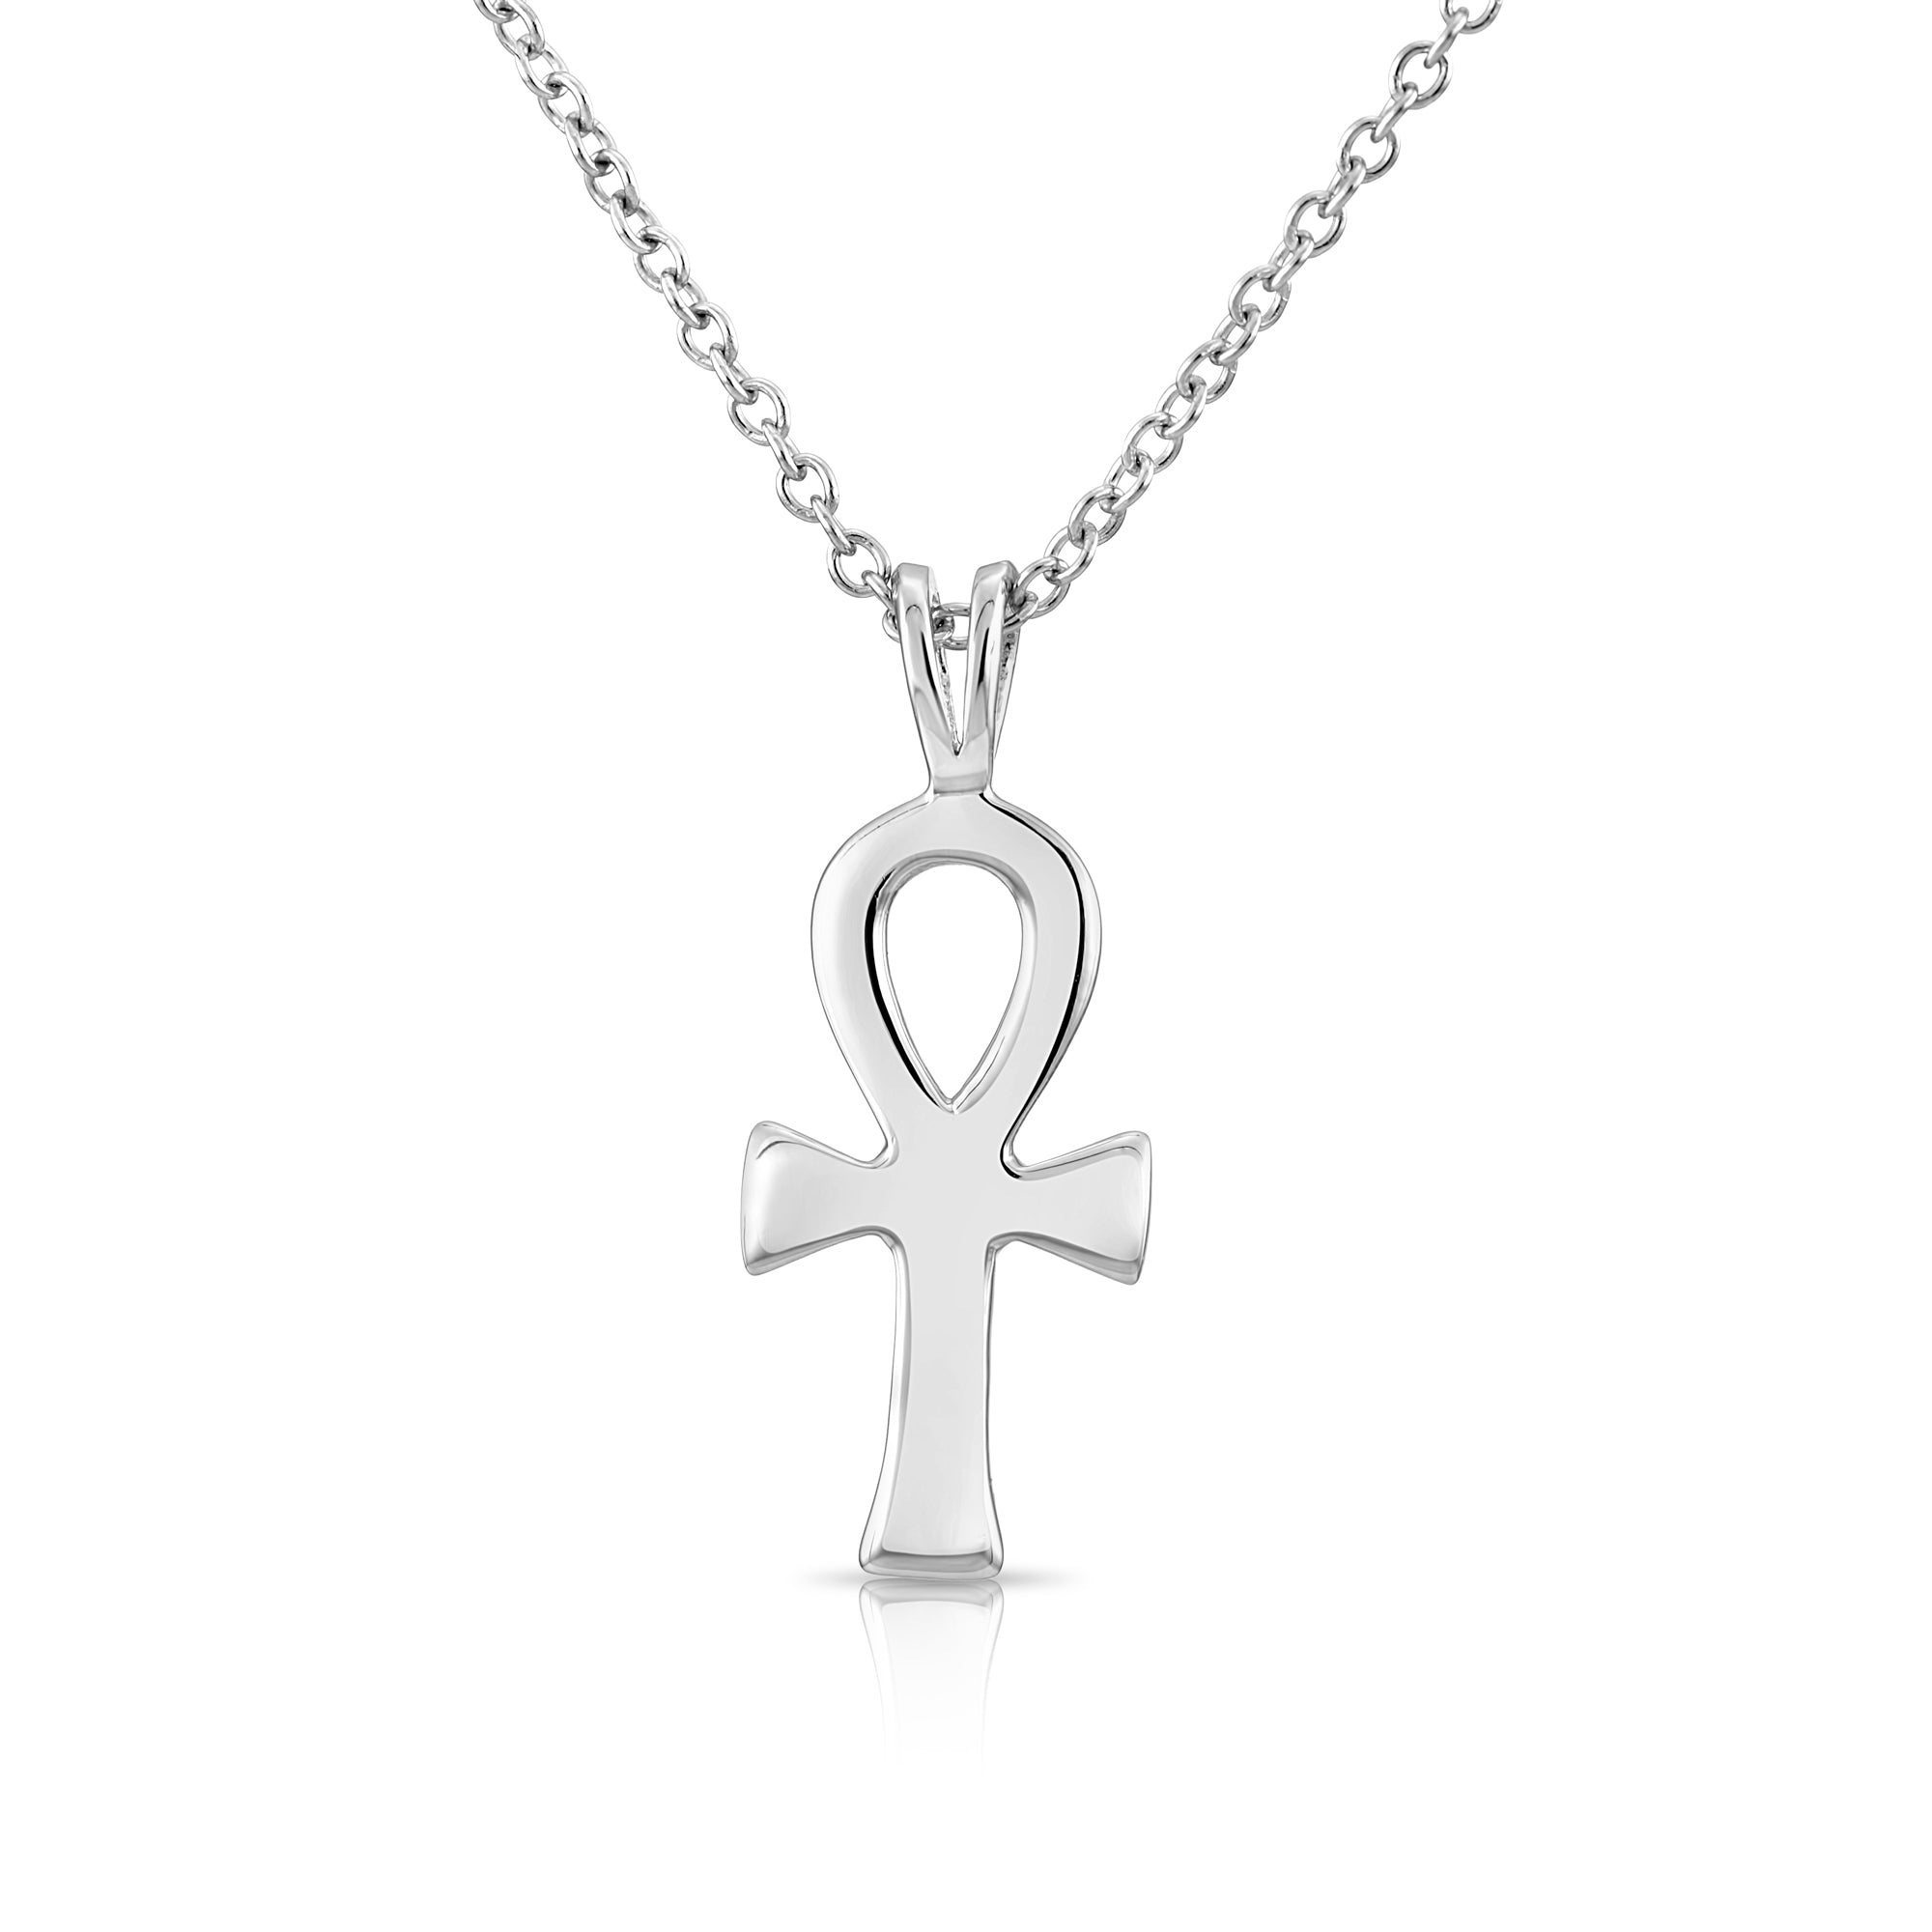 Ankh Cross Charm Necklace, Egyptian Key of Life in Sterling Silver